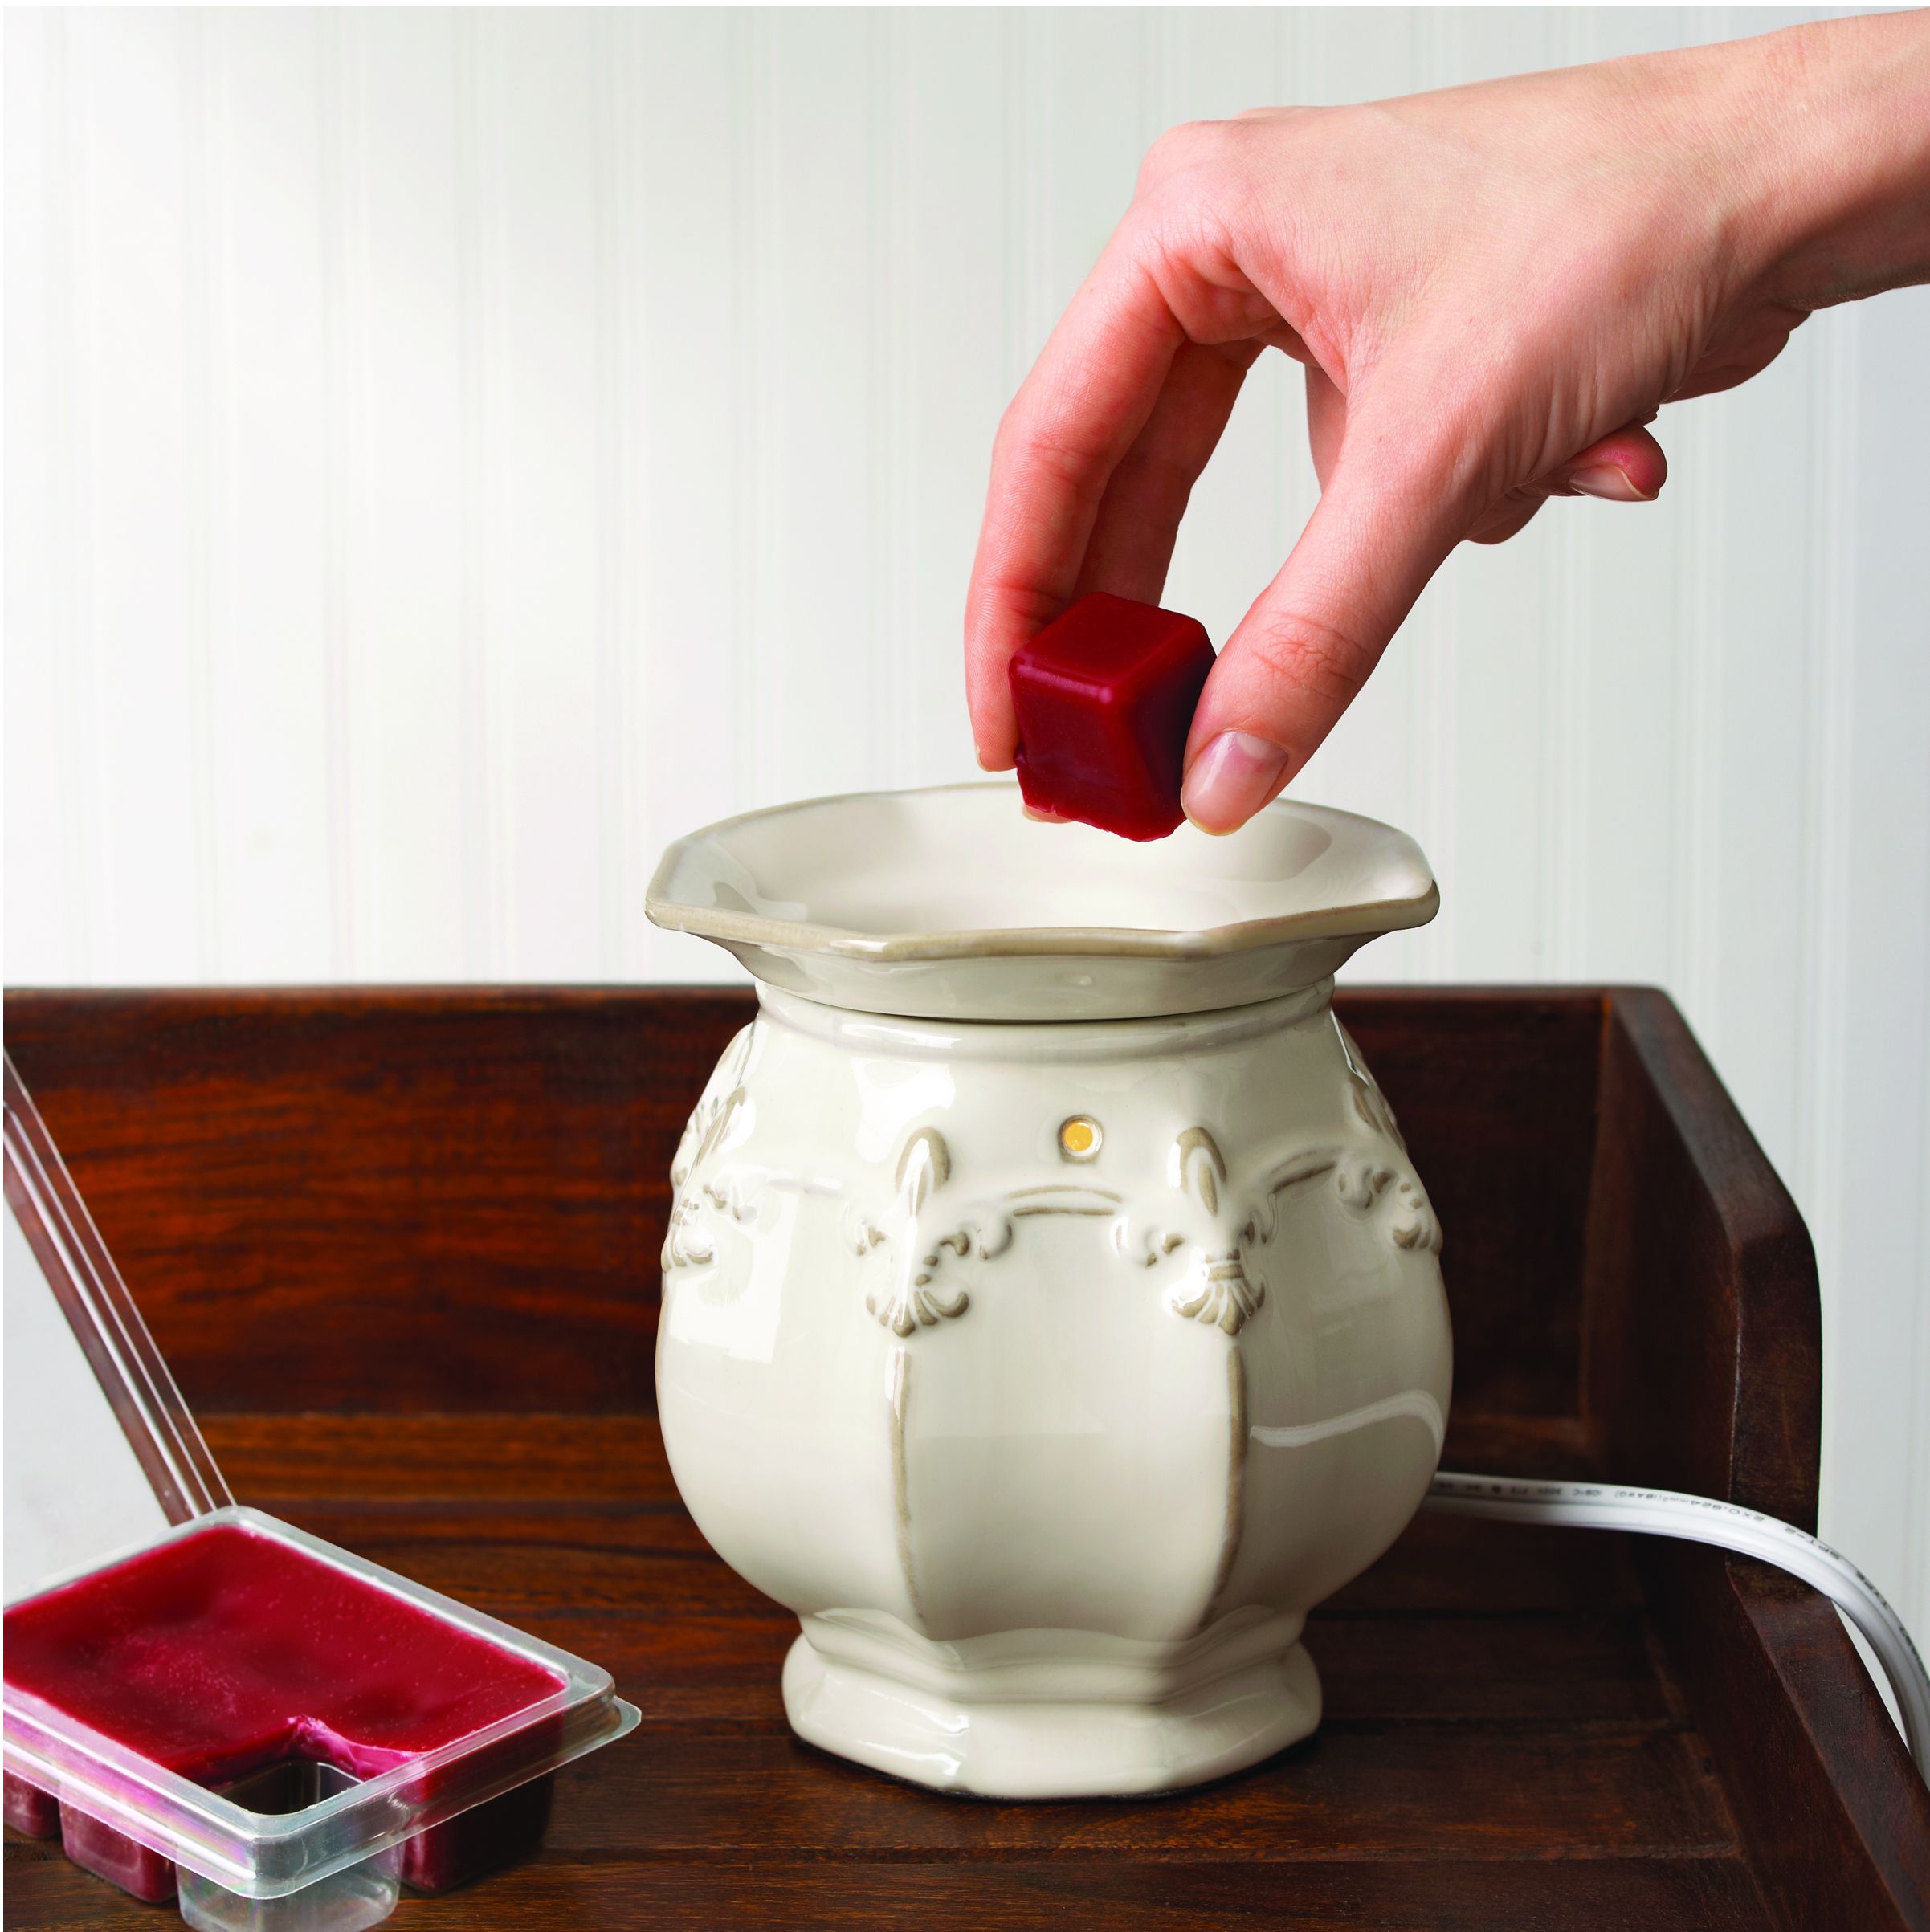 Better Homes & Gardens Expressions Full-Size Wax Warmer Starter Set - image 4 of 5